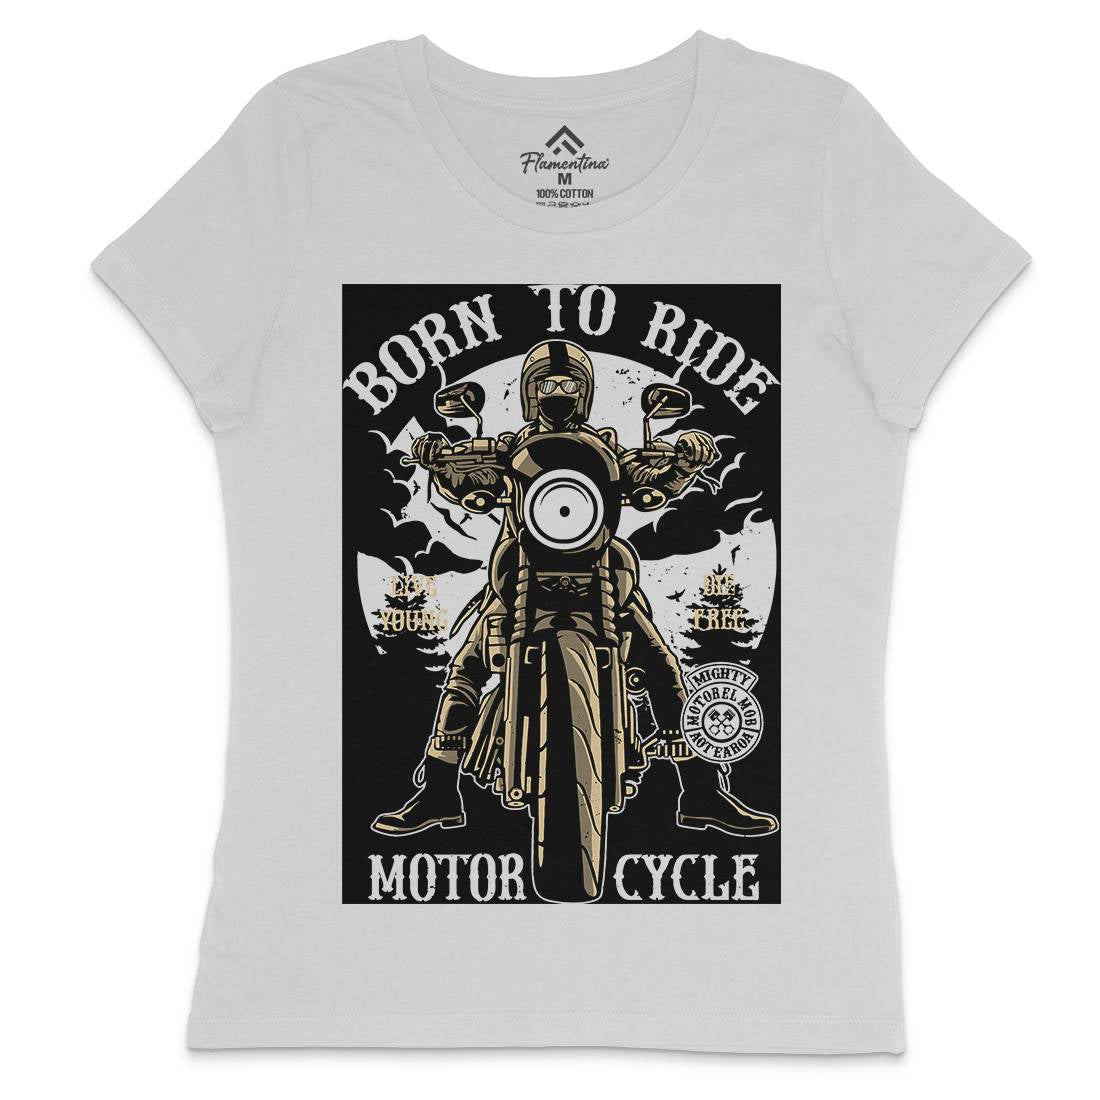 Born To Ride Womens Crew Neck T-Shirt Motorcycles A512